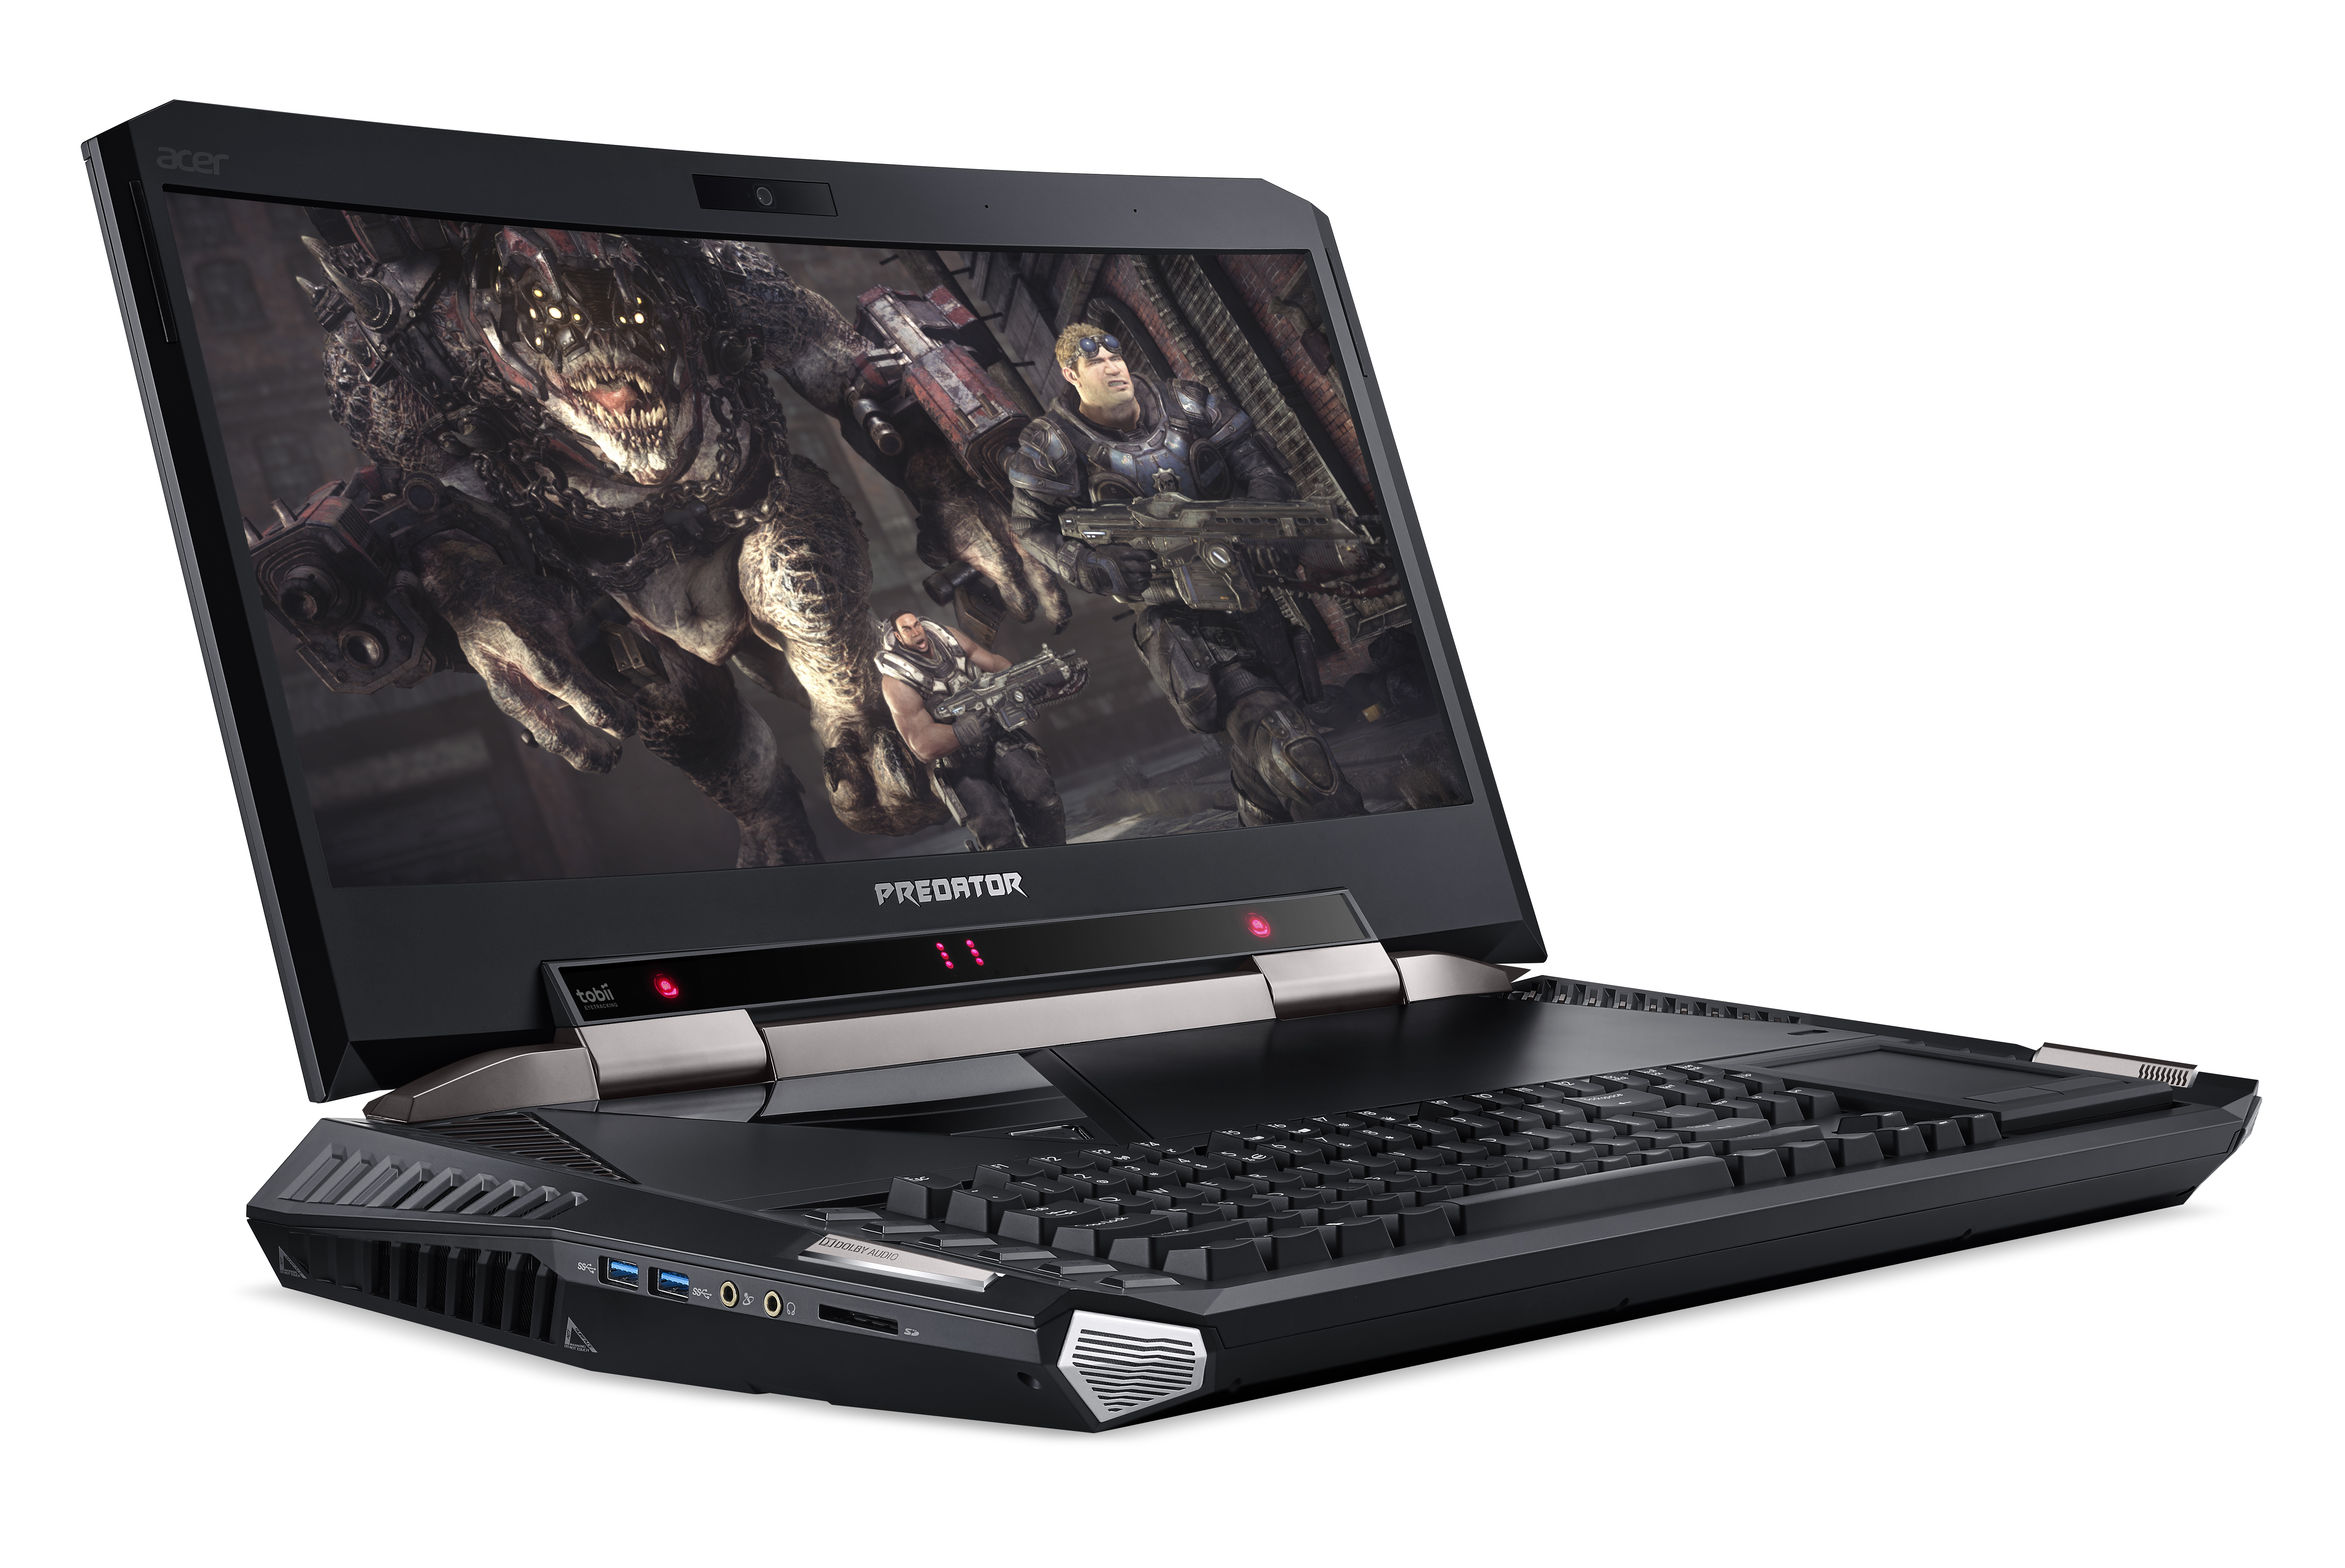 acer-predator_21_x_gx21-71_right-facing_eye-tracking-lights_game-on-screen_touchpad